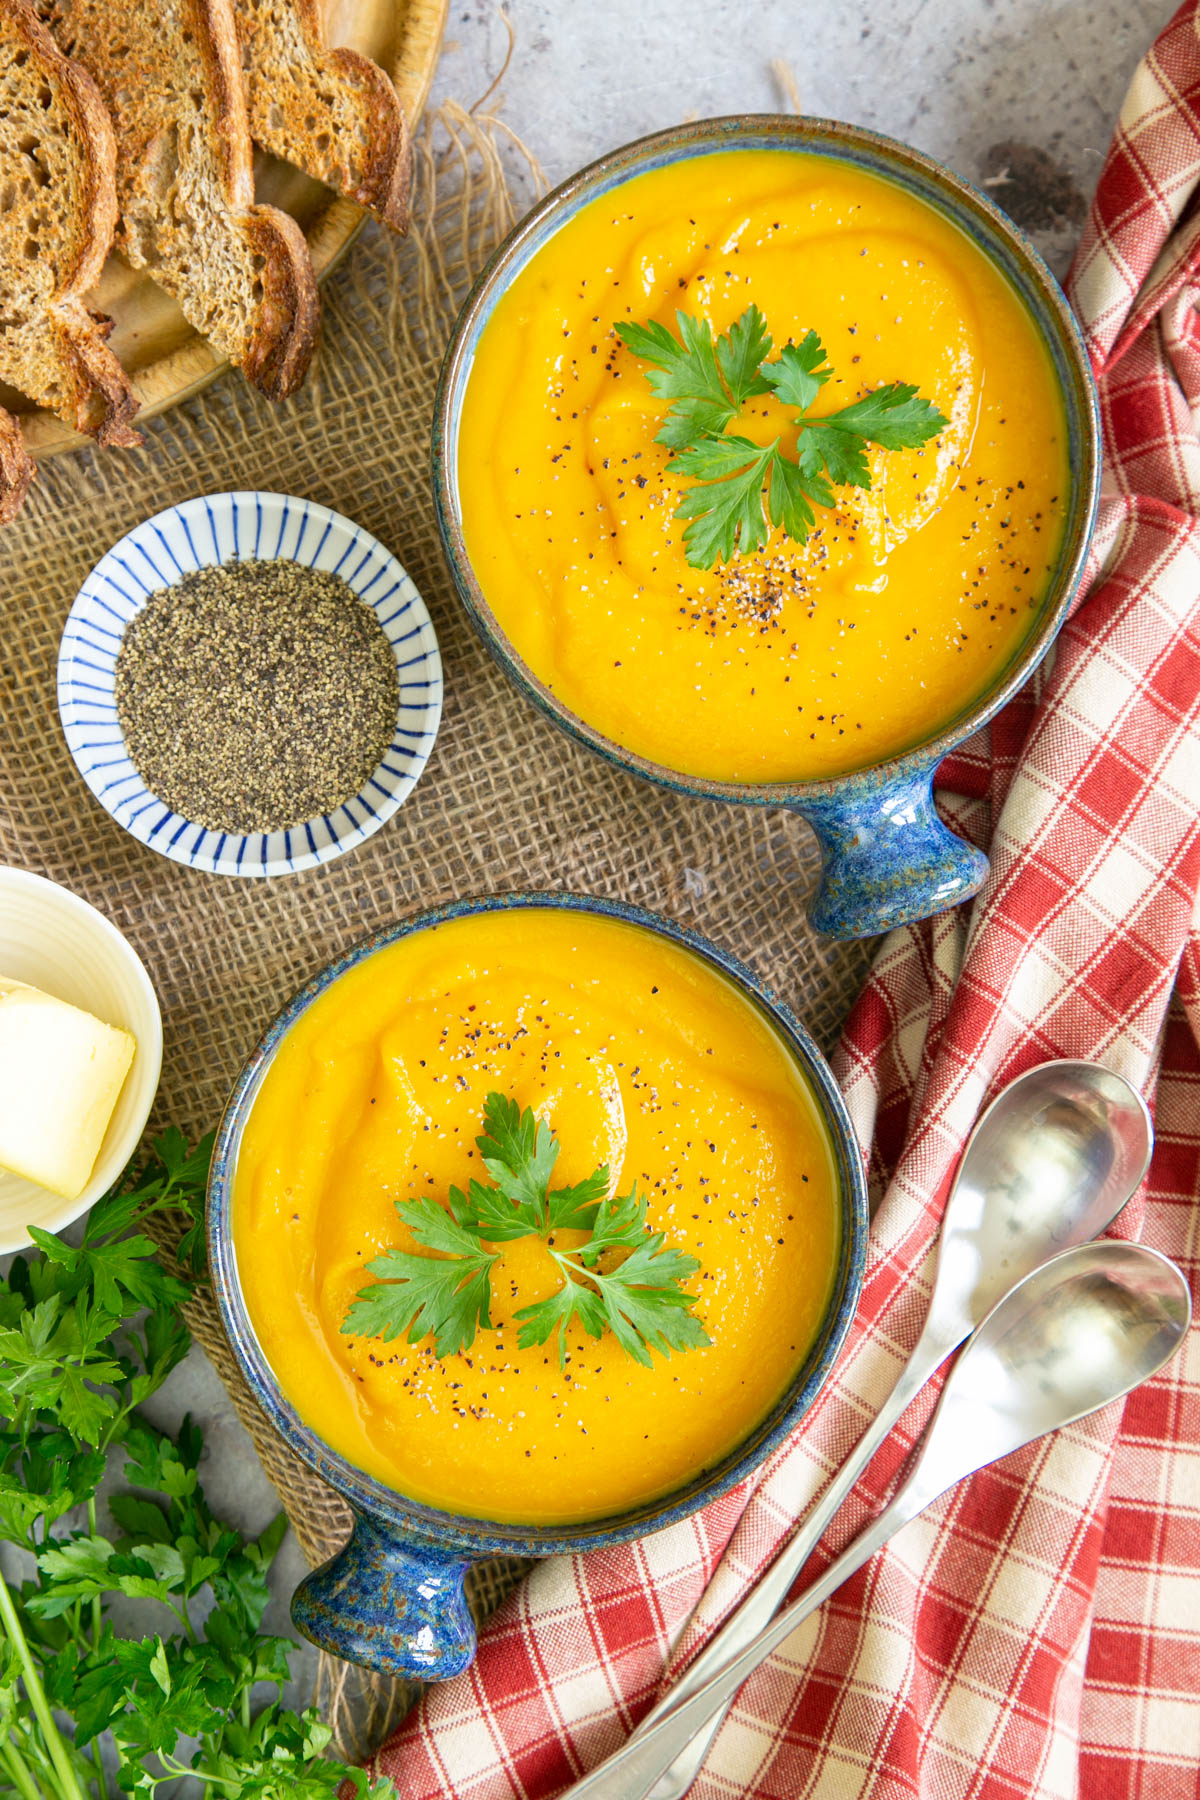 Delicious golden carrot and parsnip soup, garnished and ready to serve.